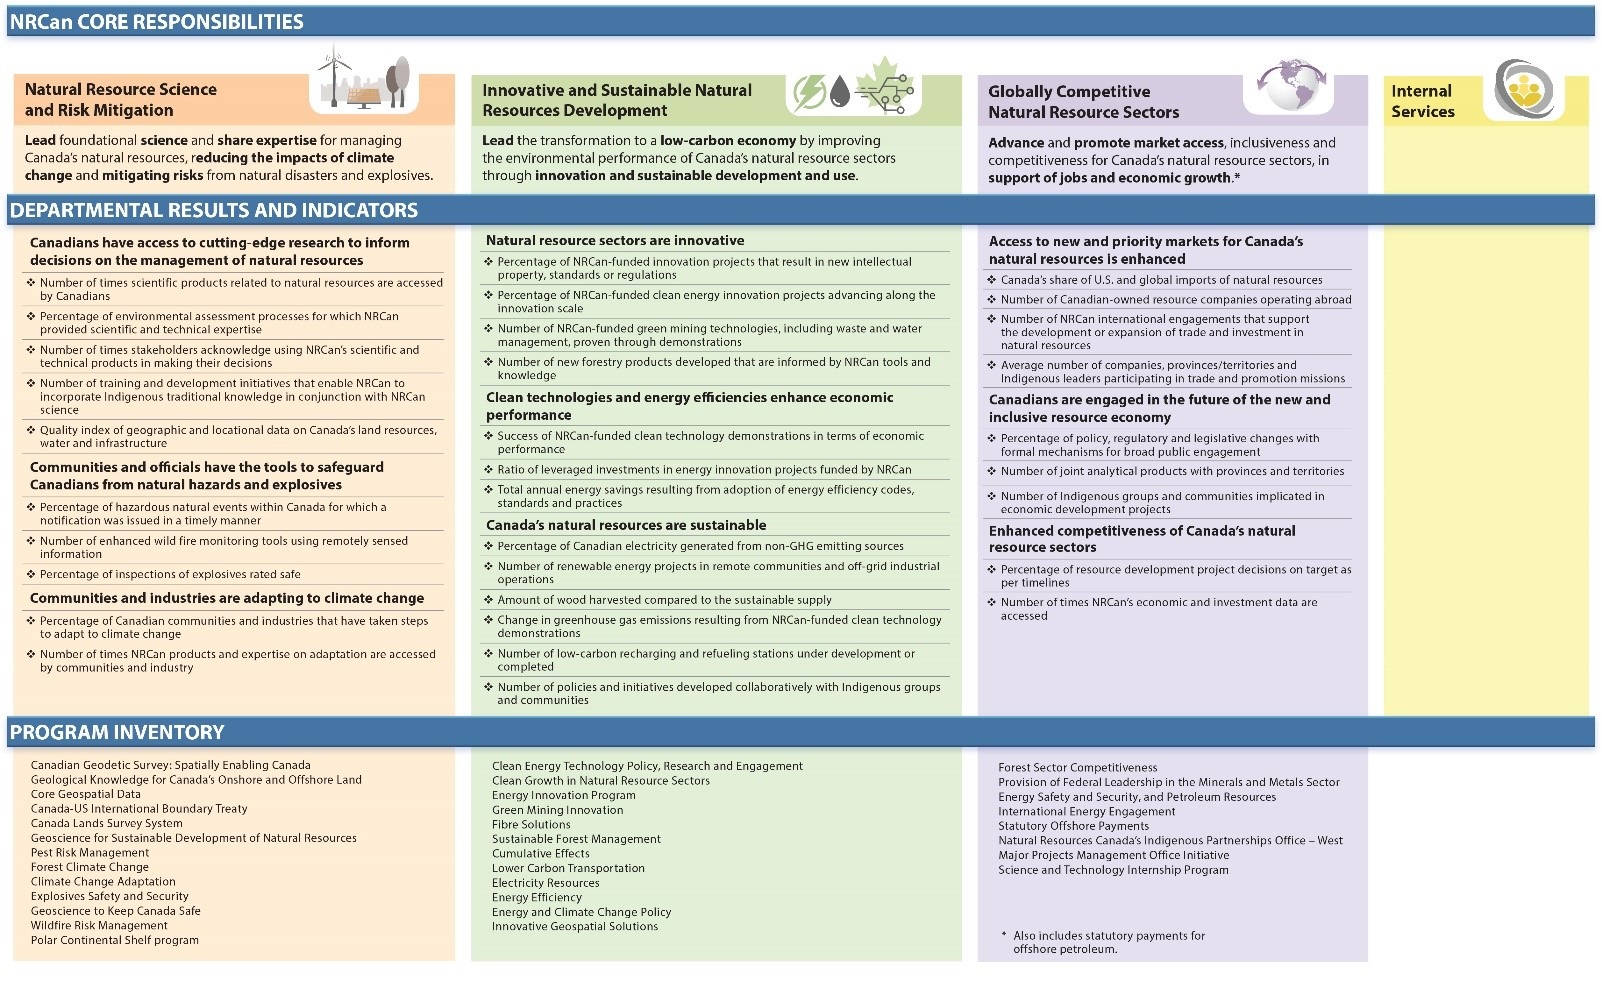 Natural Resources Canada's Departmental Results Framework